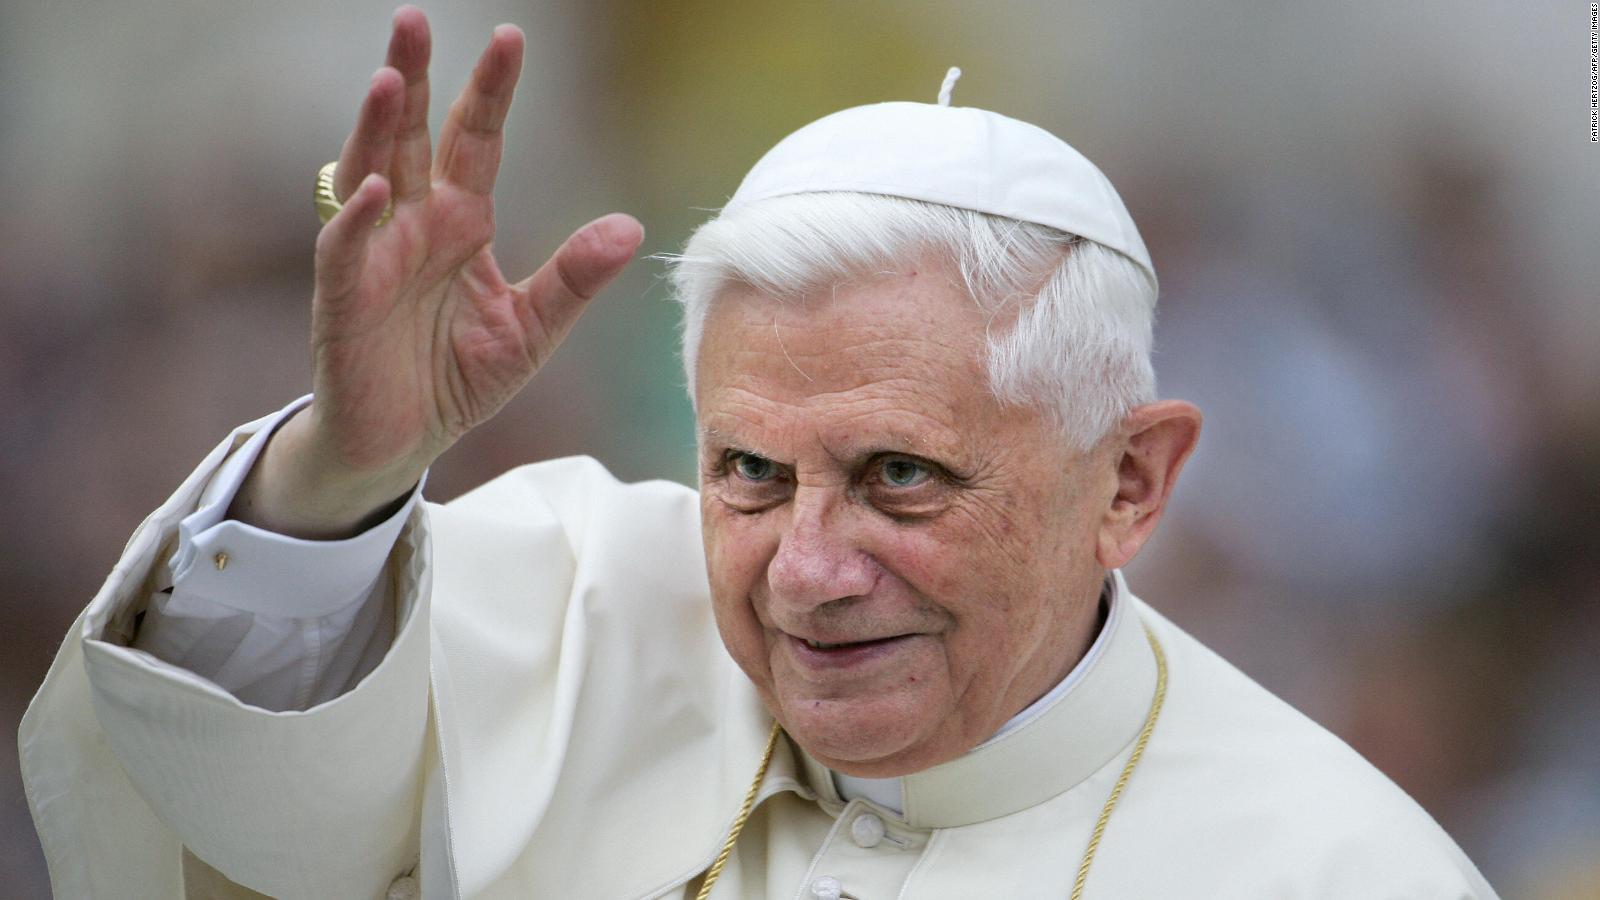 Why this Pope's resignation shocked the world